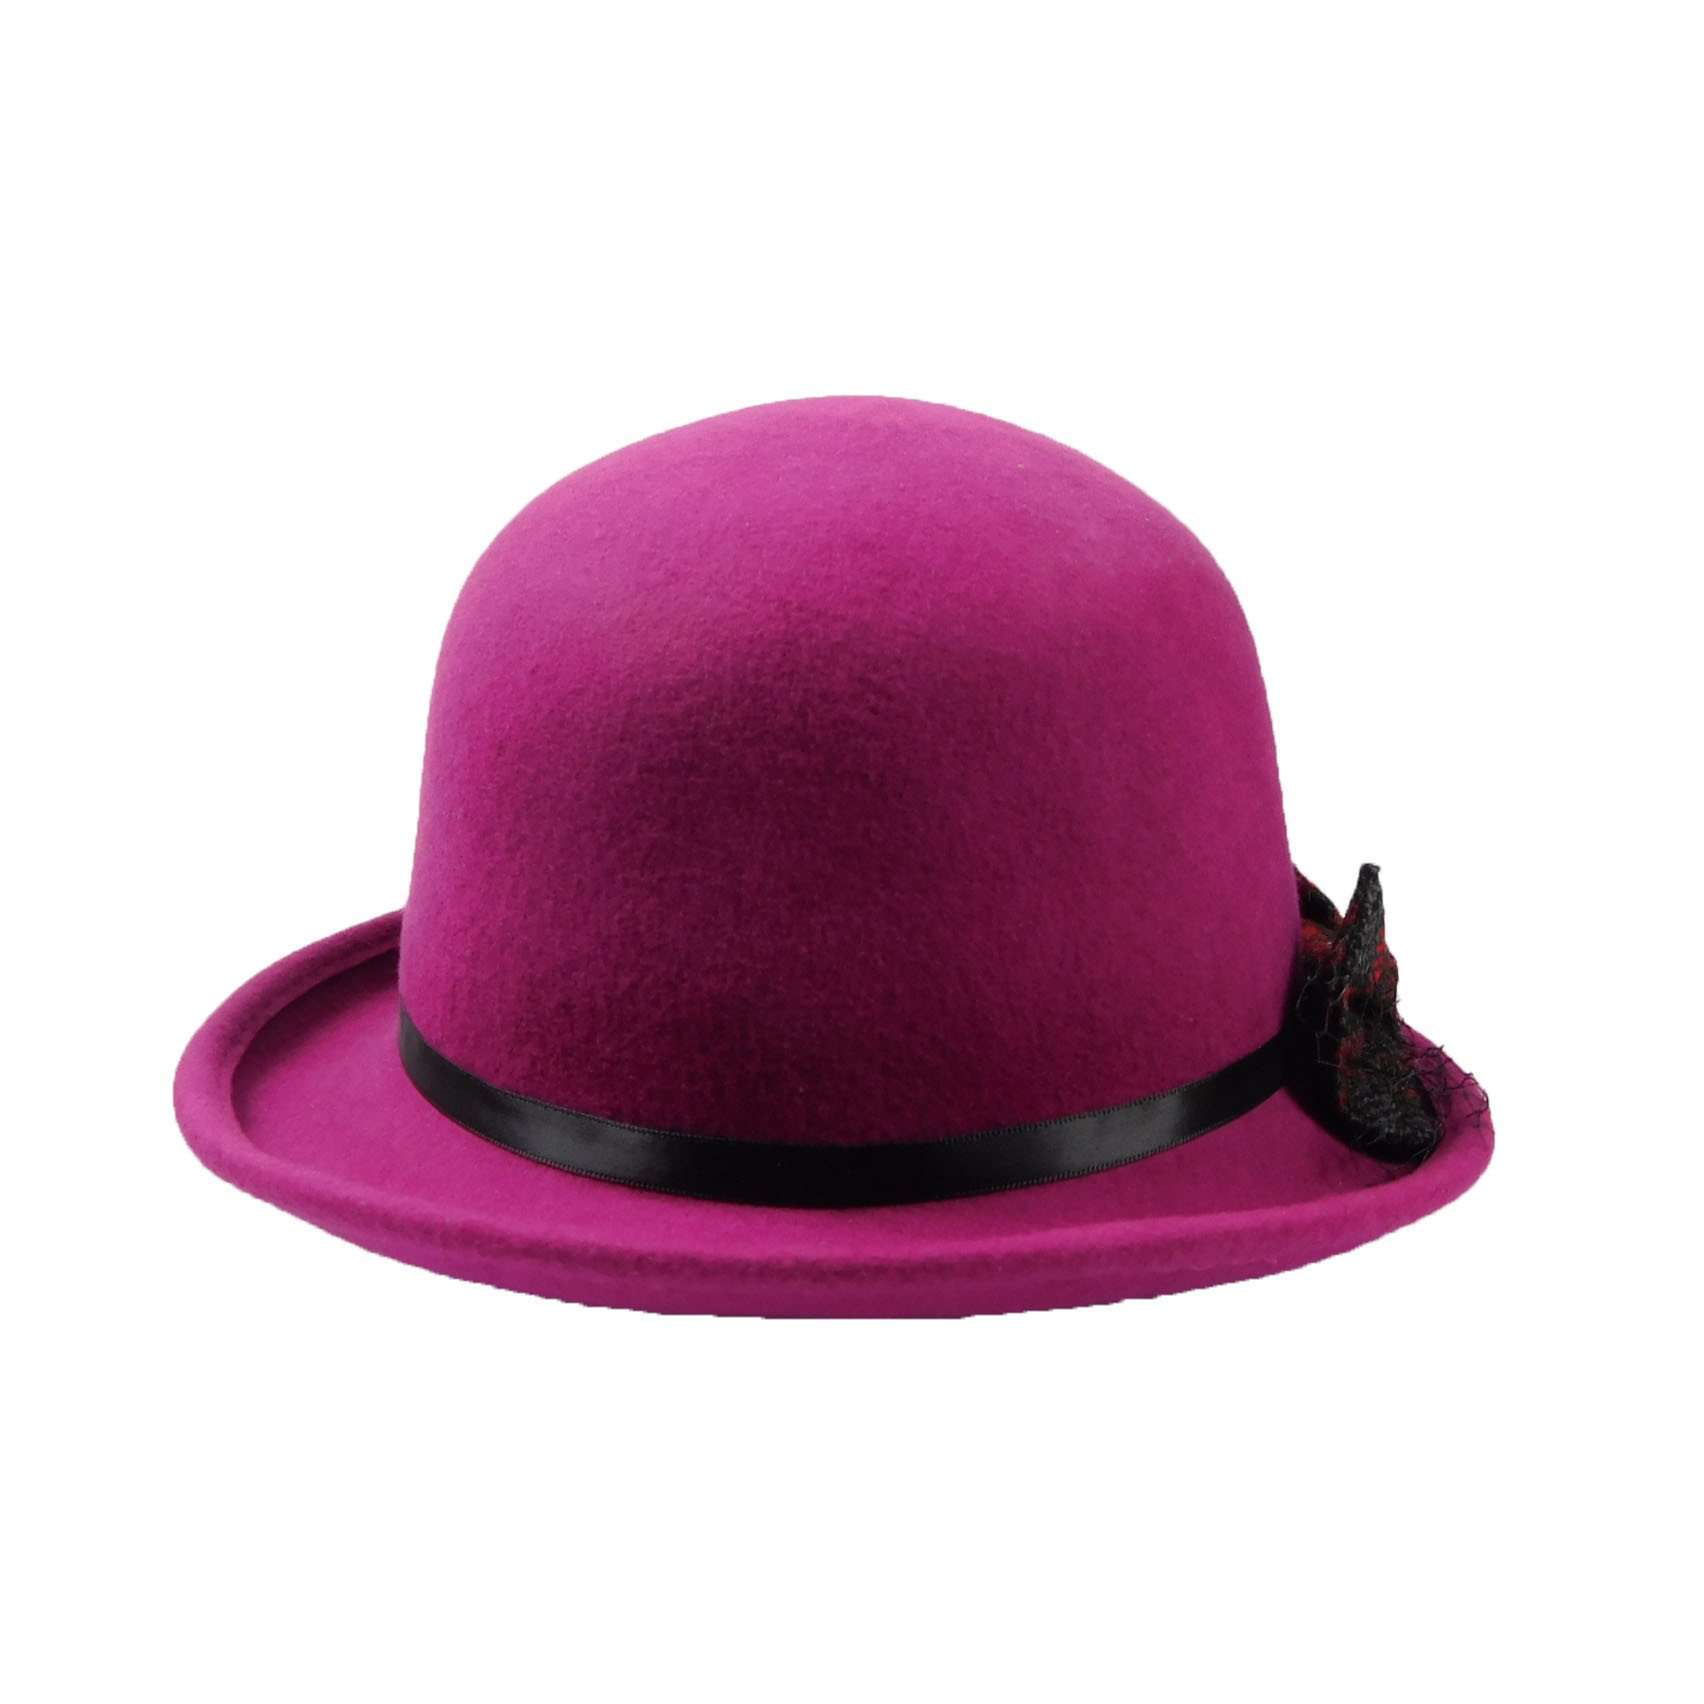 Bowler with Bow and Net -Fuchsia Bowler Hat Jeanne Simmons    